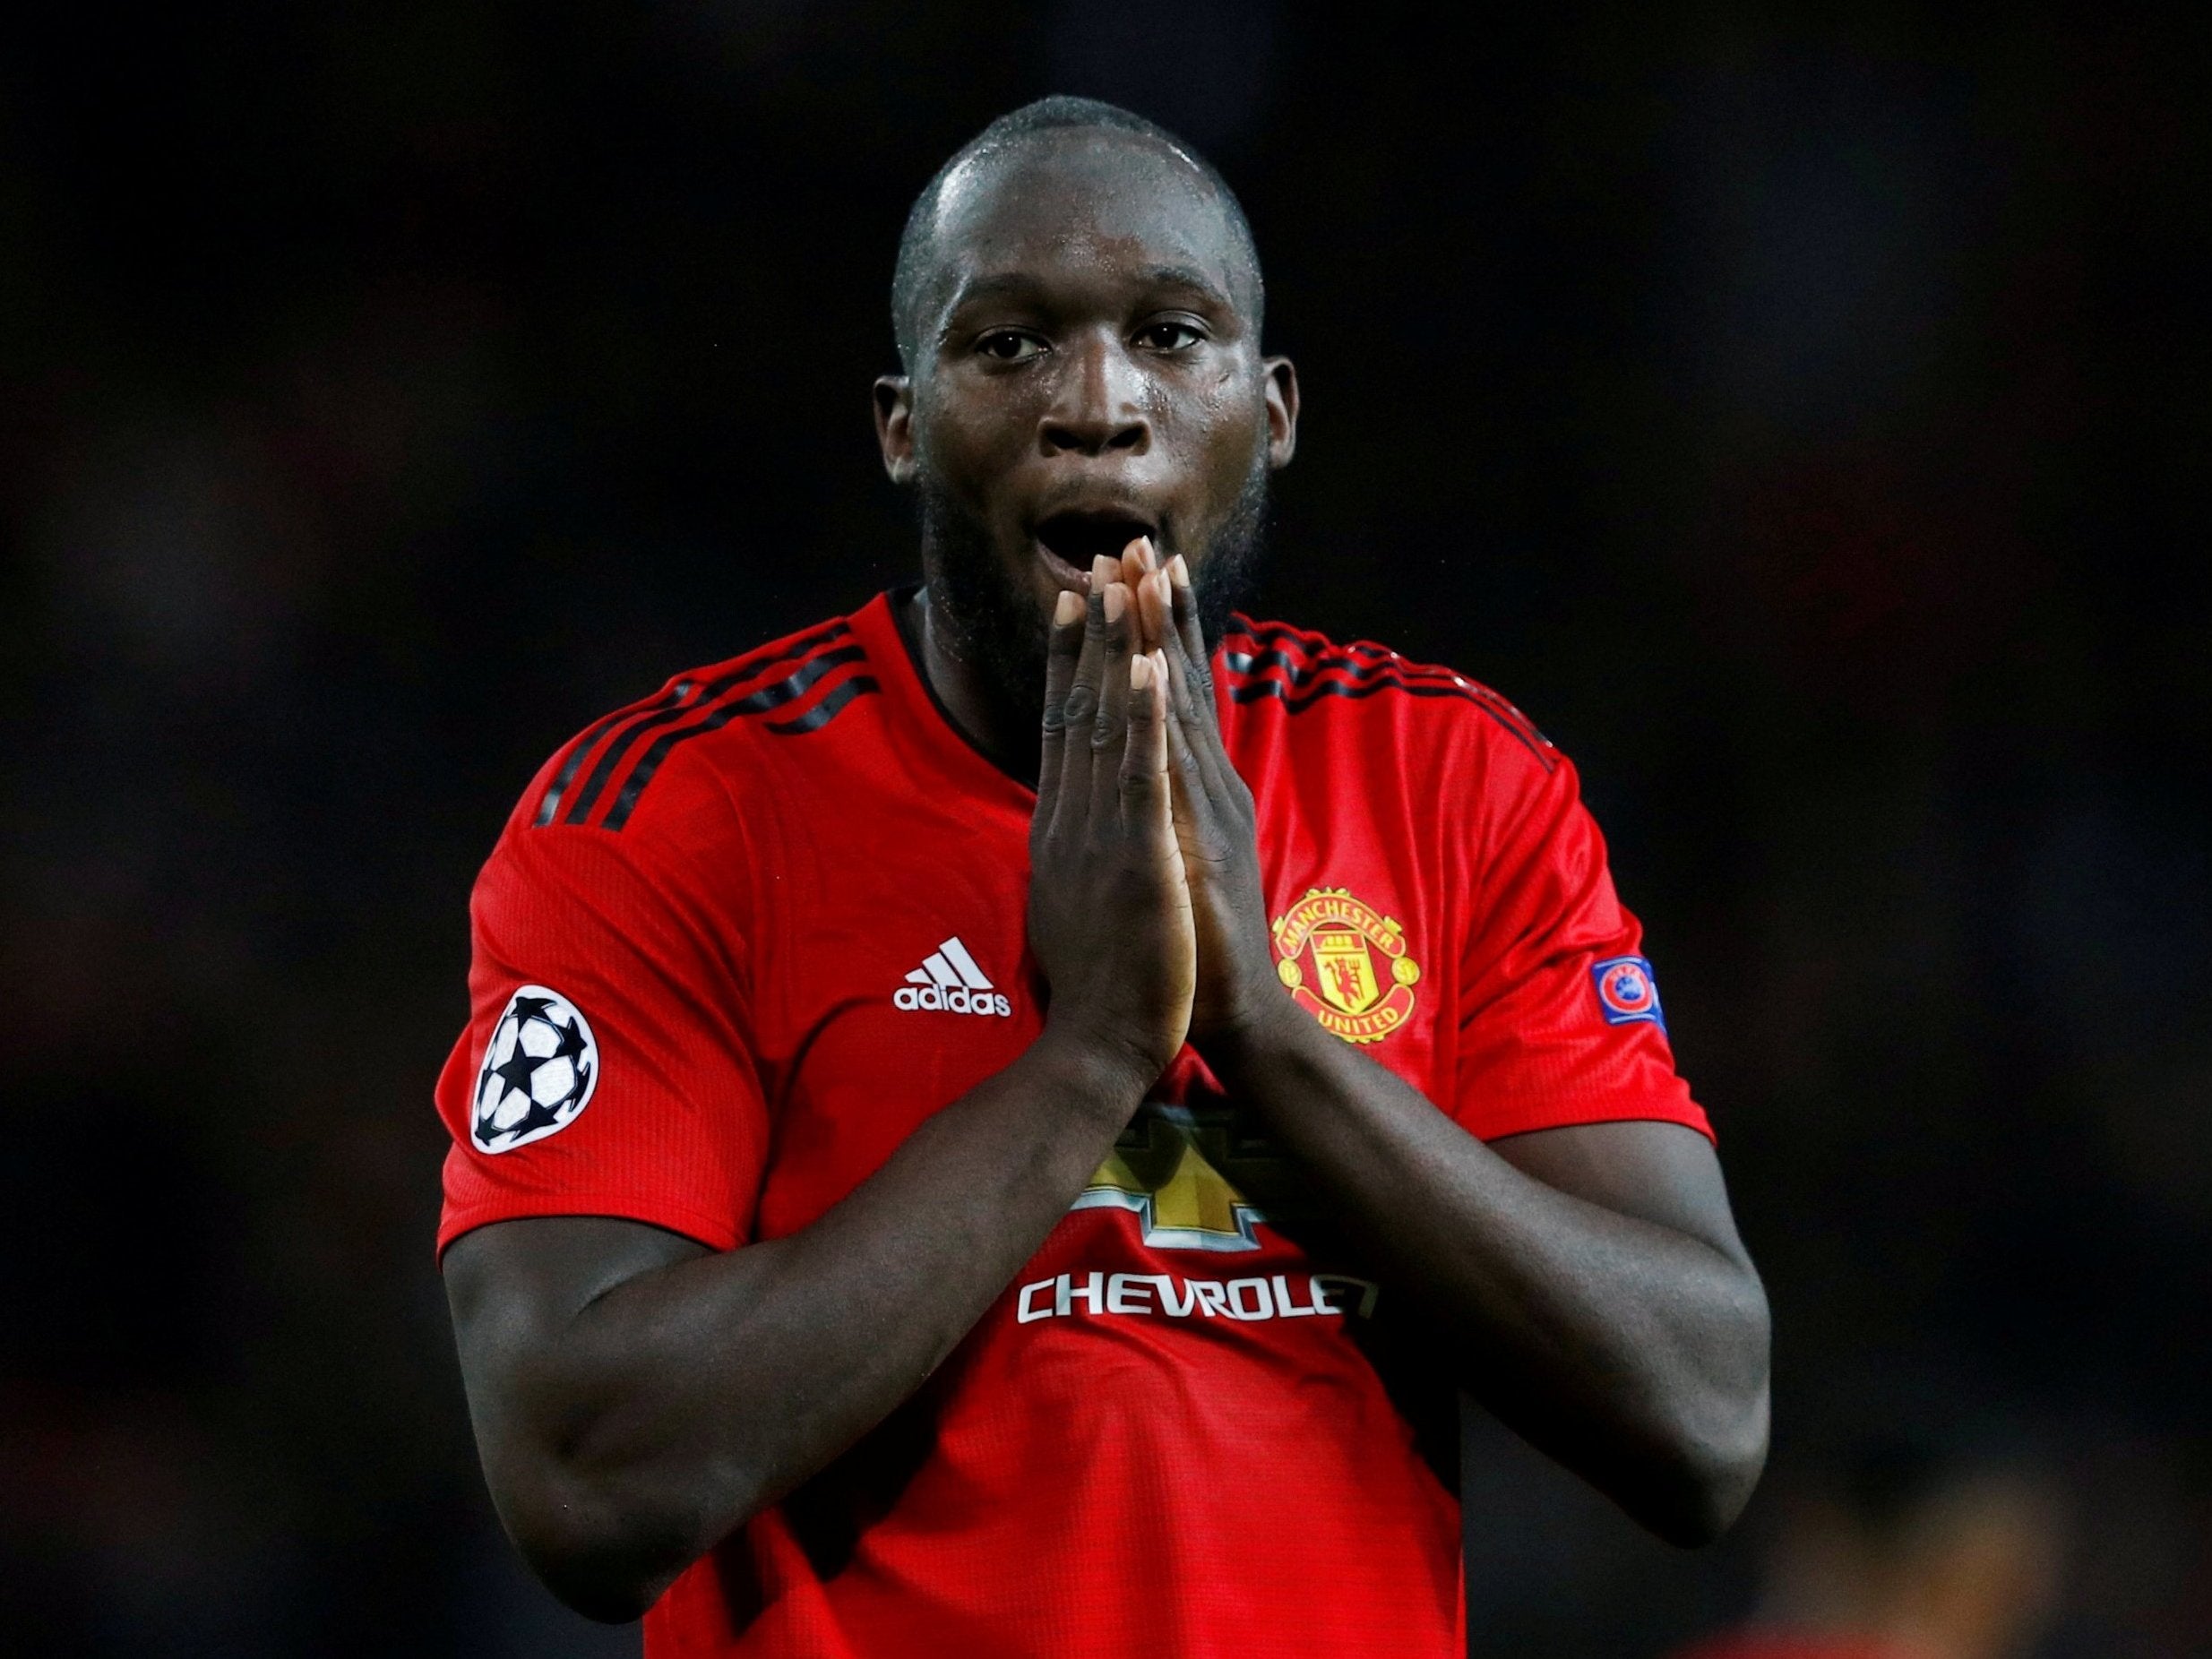 Romelu Lukaku has expressed an interest in moving to Italy